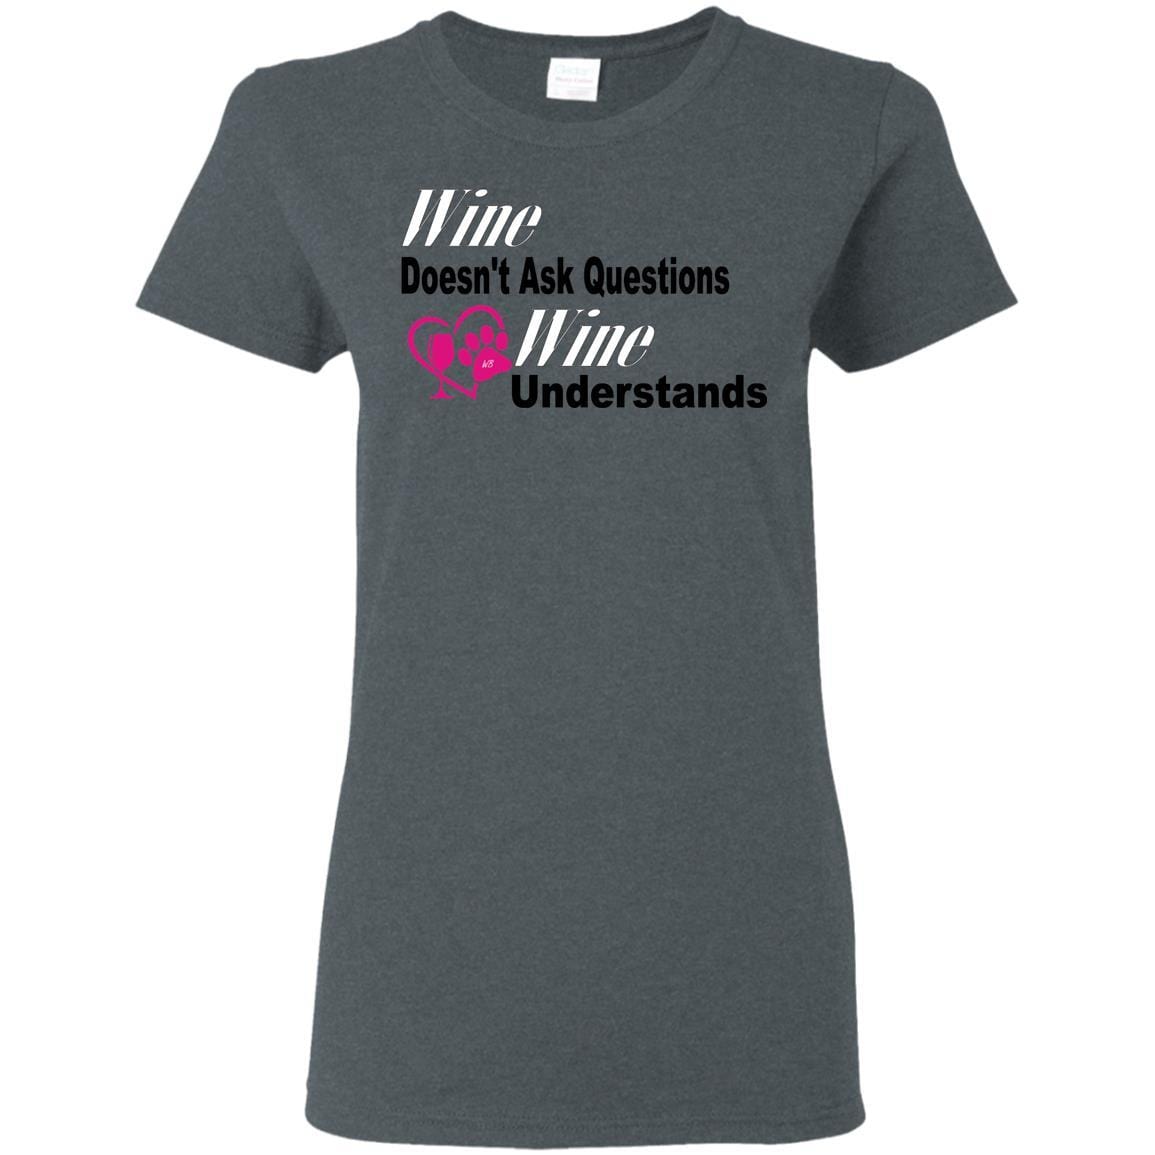 T-Shirts Dark Heather / S WineyBitches.co "Wine Doesn't Ask Questions...Ladies' T-Shirt-Wht-Black-Pink Lettering WineyBitchesCo